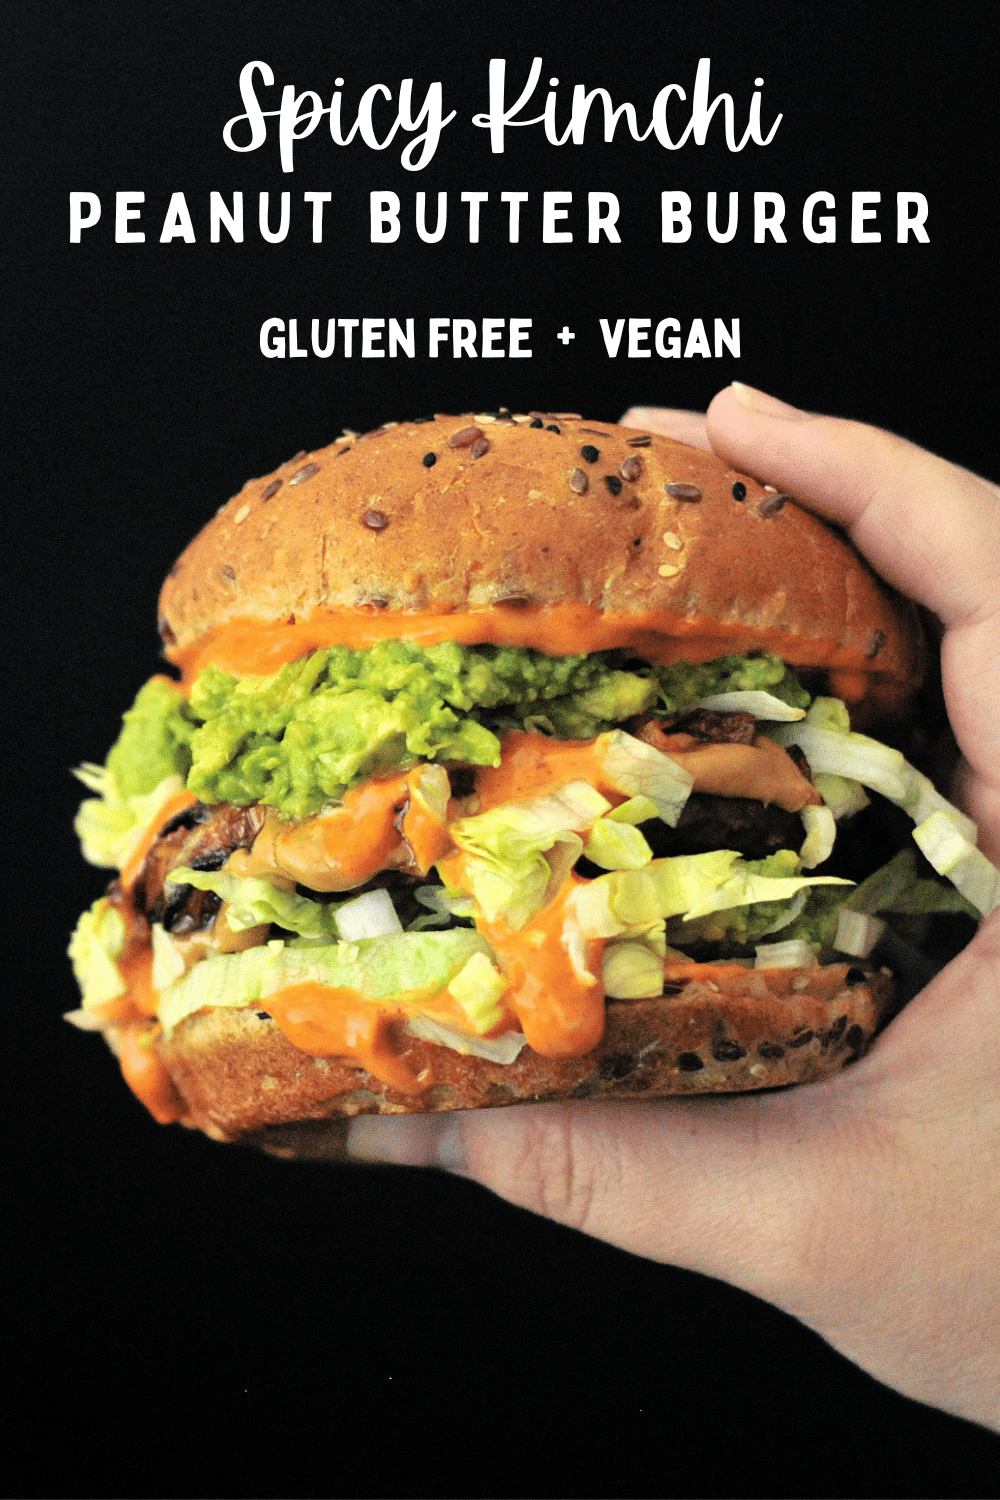 a spicy peanut butter burger held in a hand against a black background; burger has bright orange spicy kimchi sauce, shredded iceberg lettuce, a veggie patty, mashed avocado, and a seeded bun.